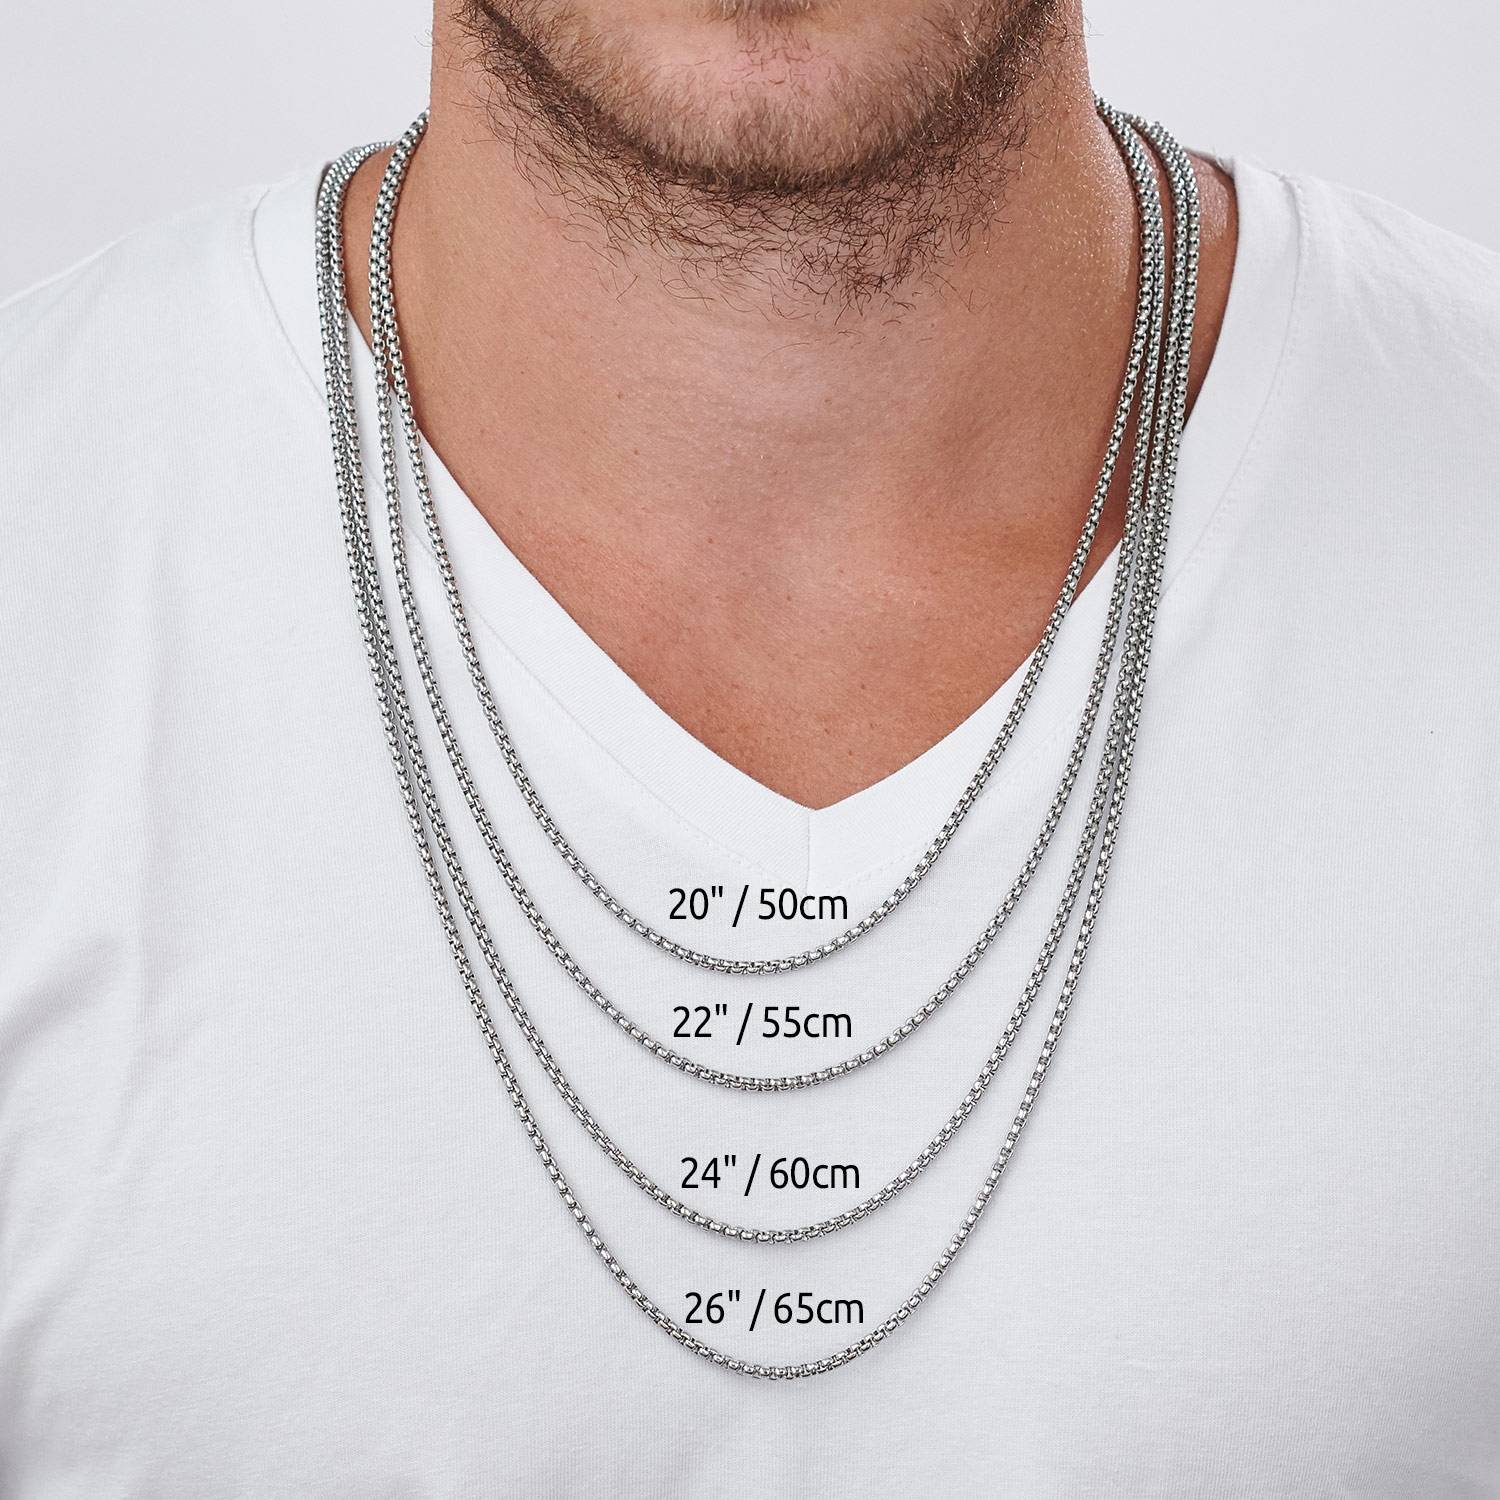 Necklace Chain Lengths for Men